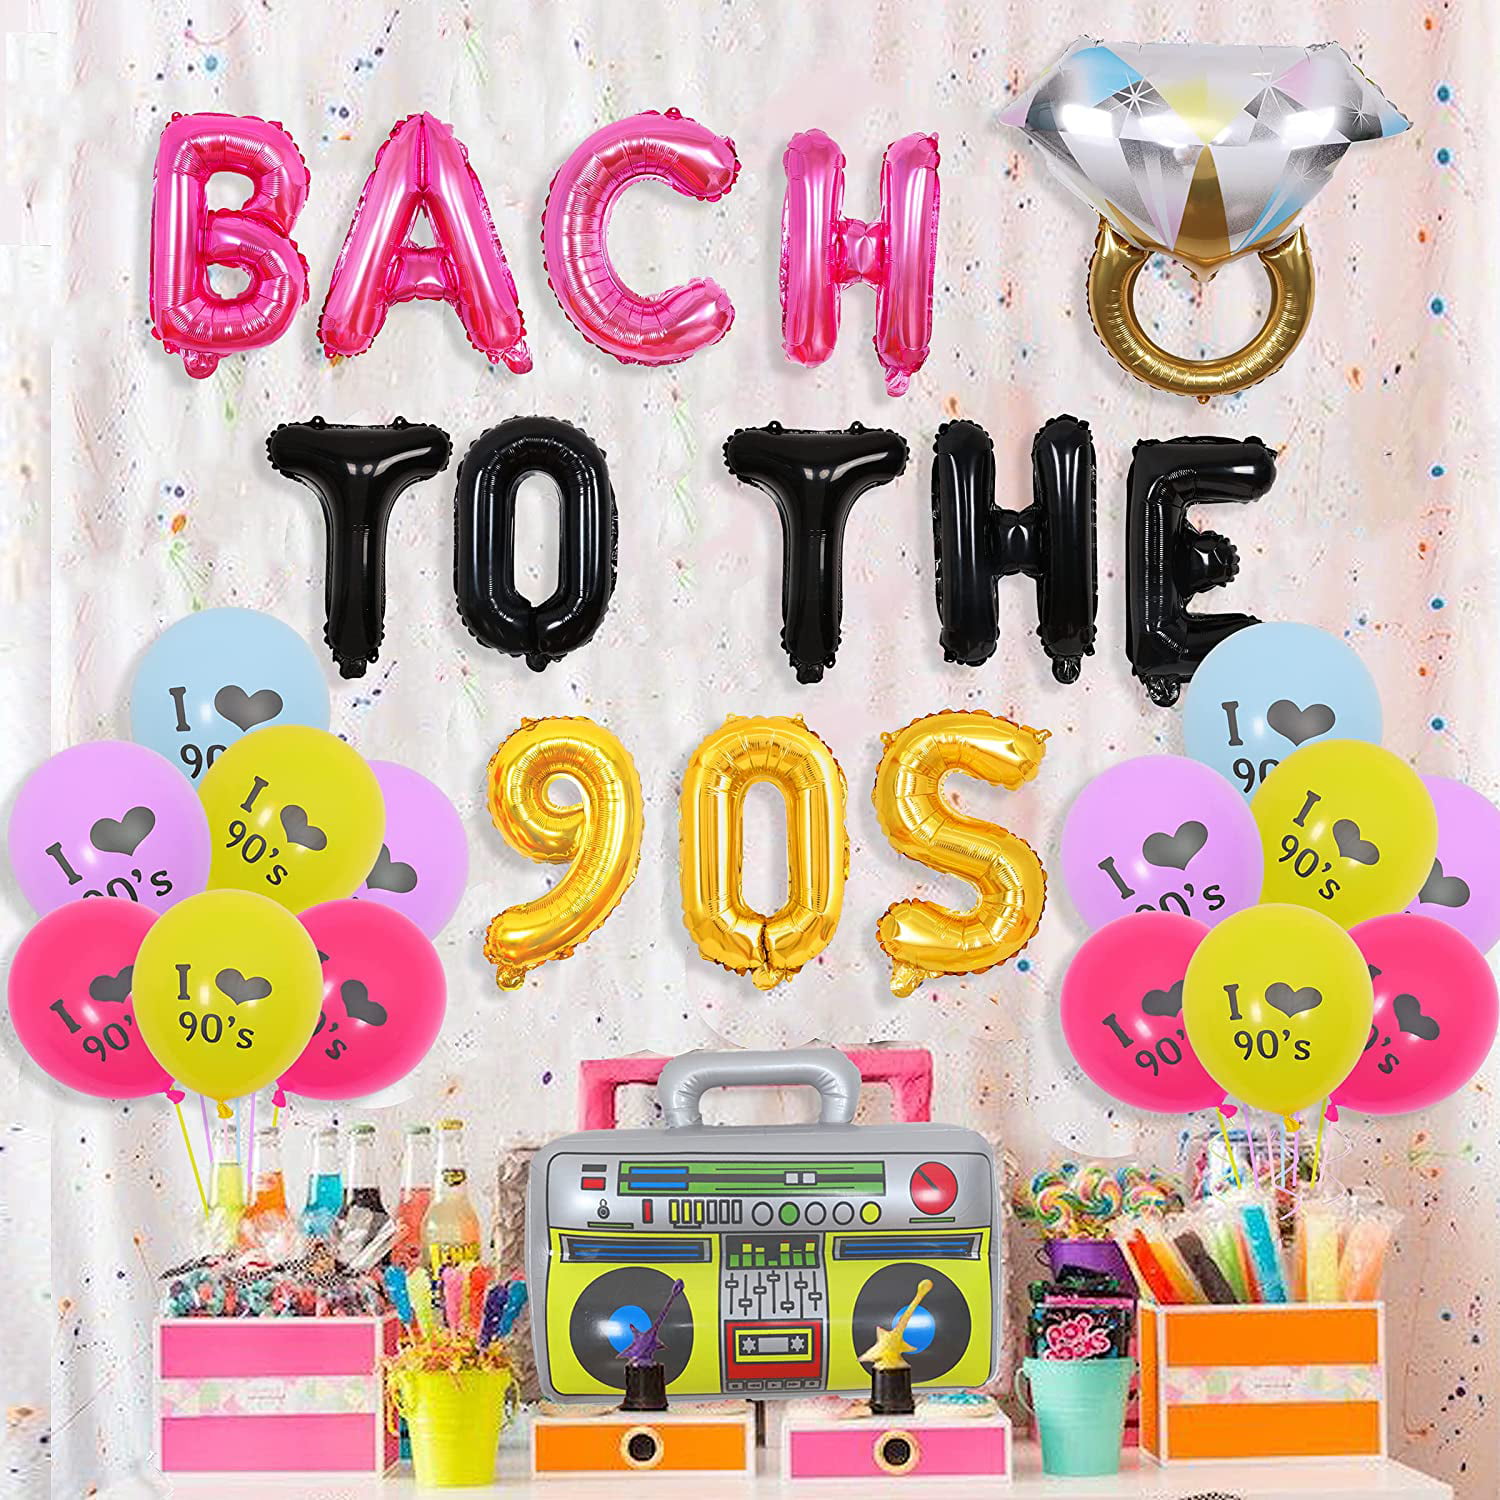 BACH TO THE 90s Bachelorette Party Balloon Decorations, Bach to ...